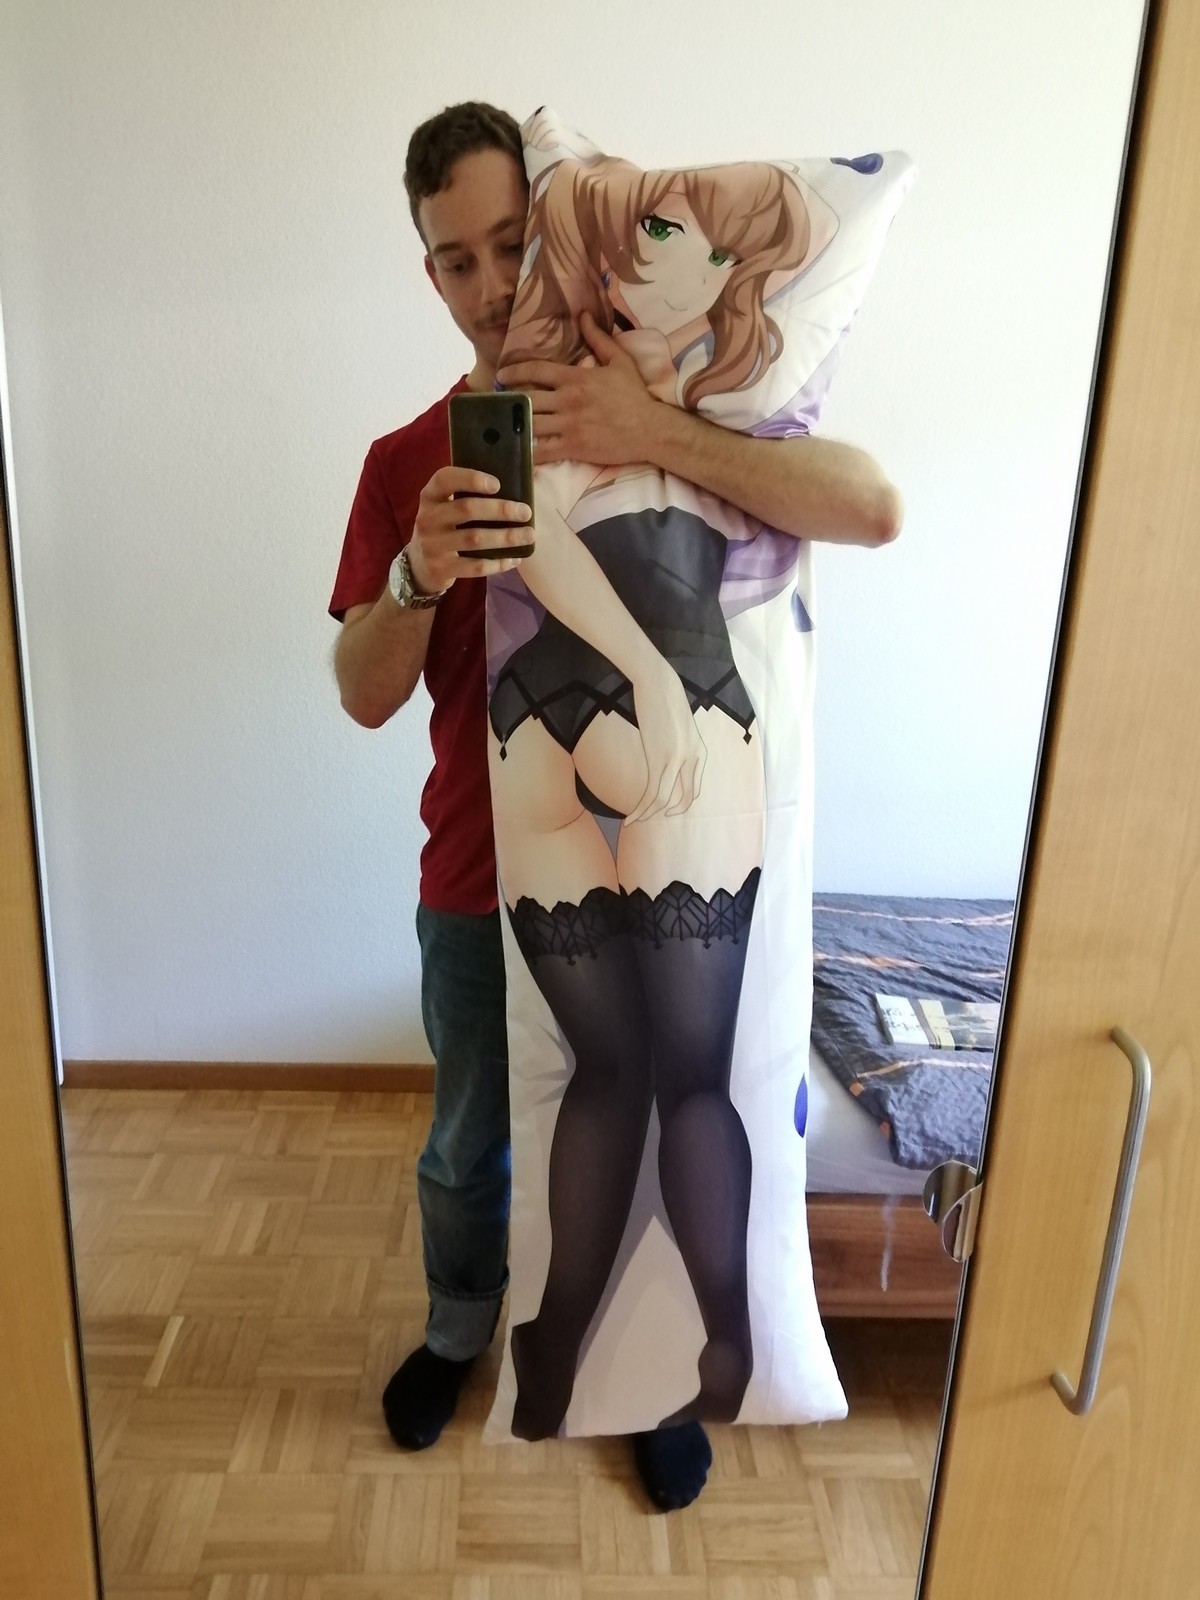 Lisa Dakimakura!. I bought a Lisa Dakimakura! Other weebs have a Waifu, but I have a Mamii. And now I can finally cuddle with her! Yes, of course that's me. I'm